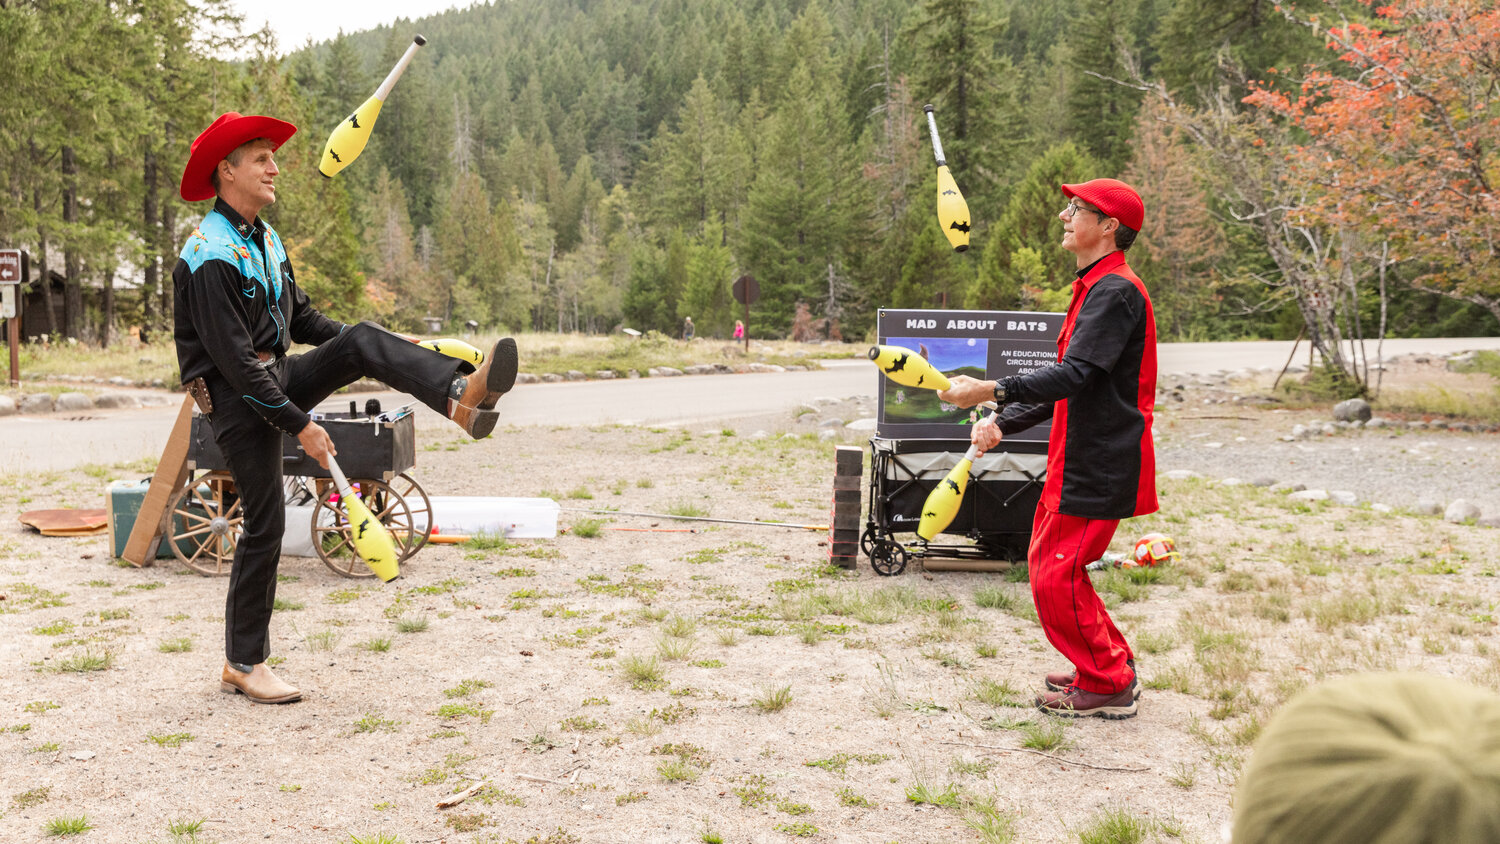 David Lichtenstein and JuggleMania’s Rhys Thomas throw bats into the air while juggling during a Vaudeville-esque show at Mount Rainier National Park on Tuesday, Sept. 12.